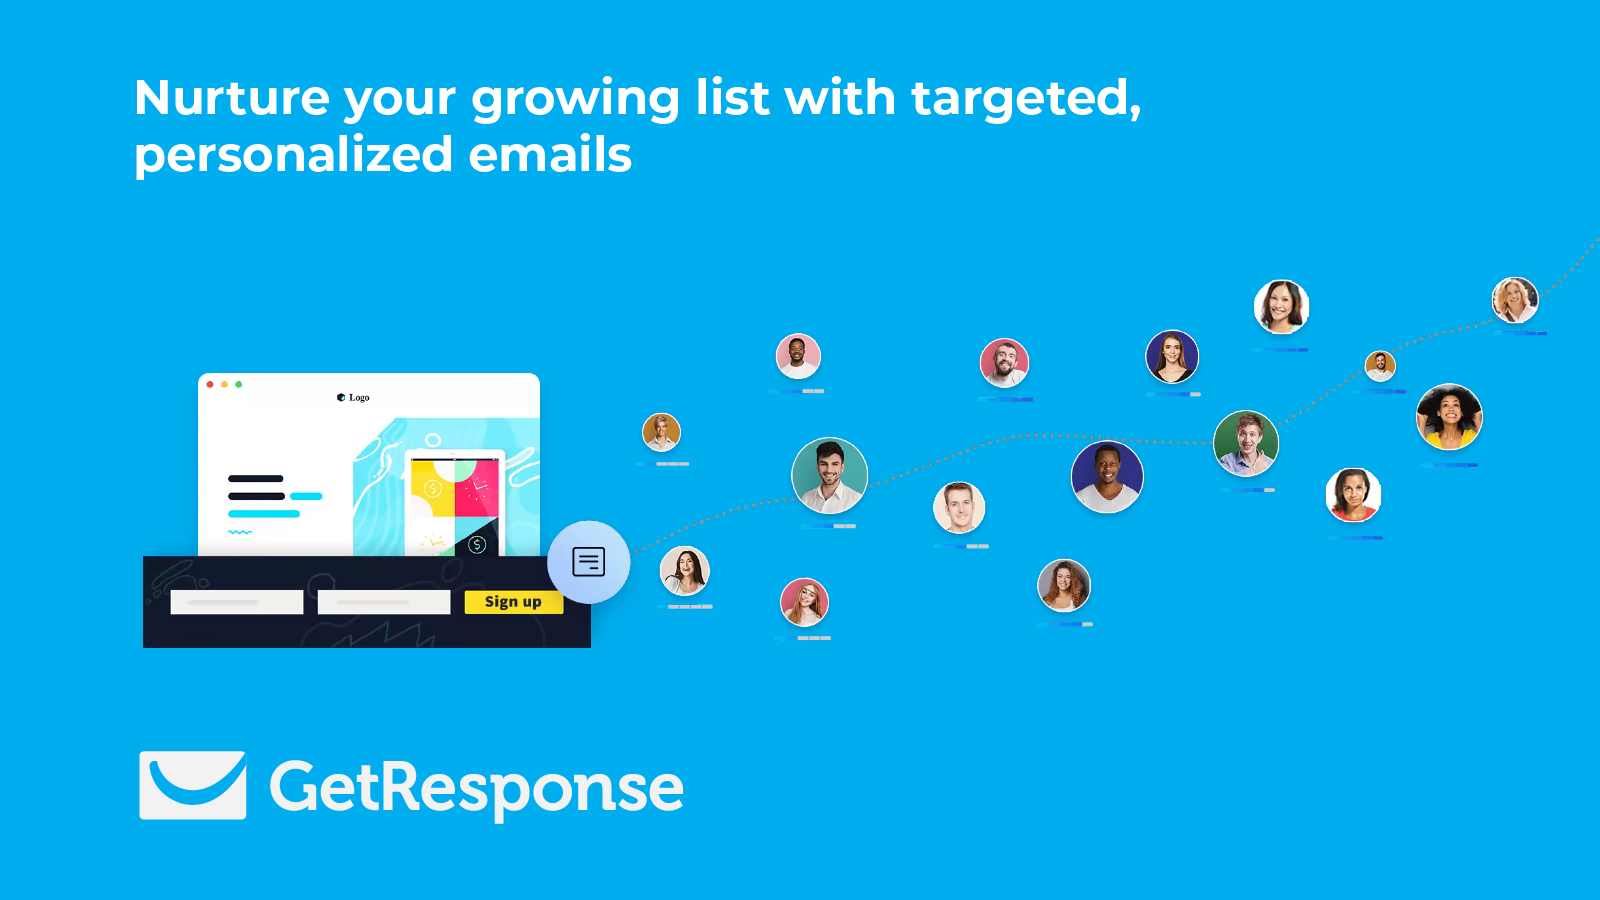 Nurture your growing list with targeted emails